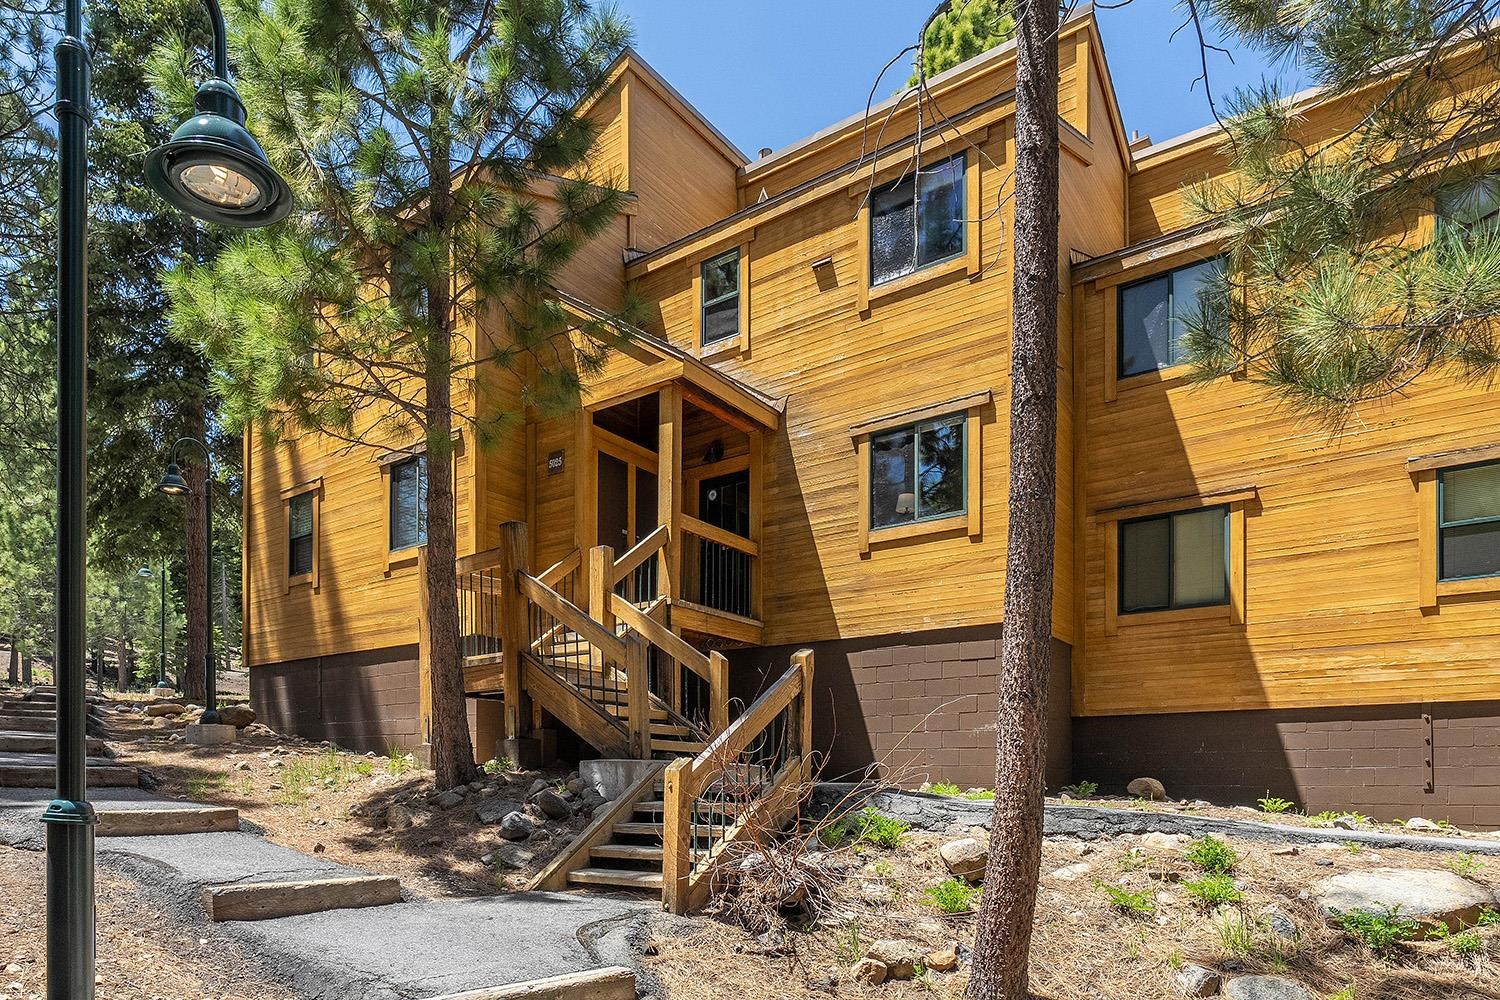 Image for 5025 Gold Bend, Truckee, CA 96161-4106